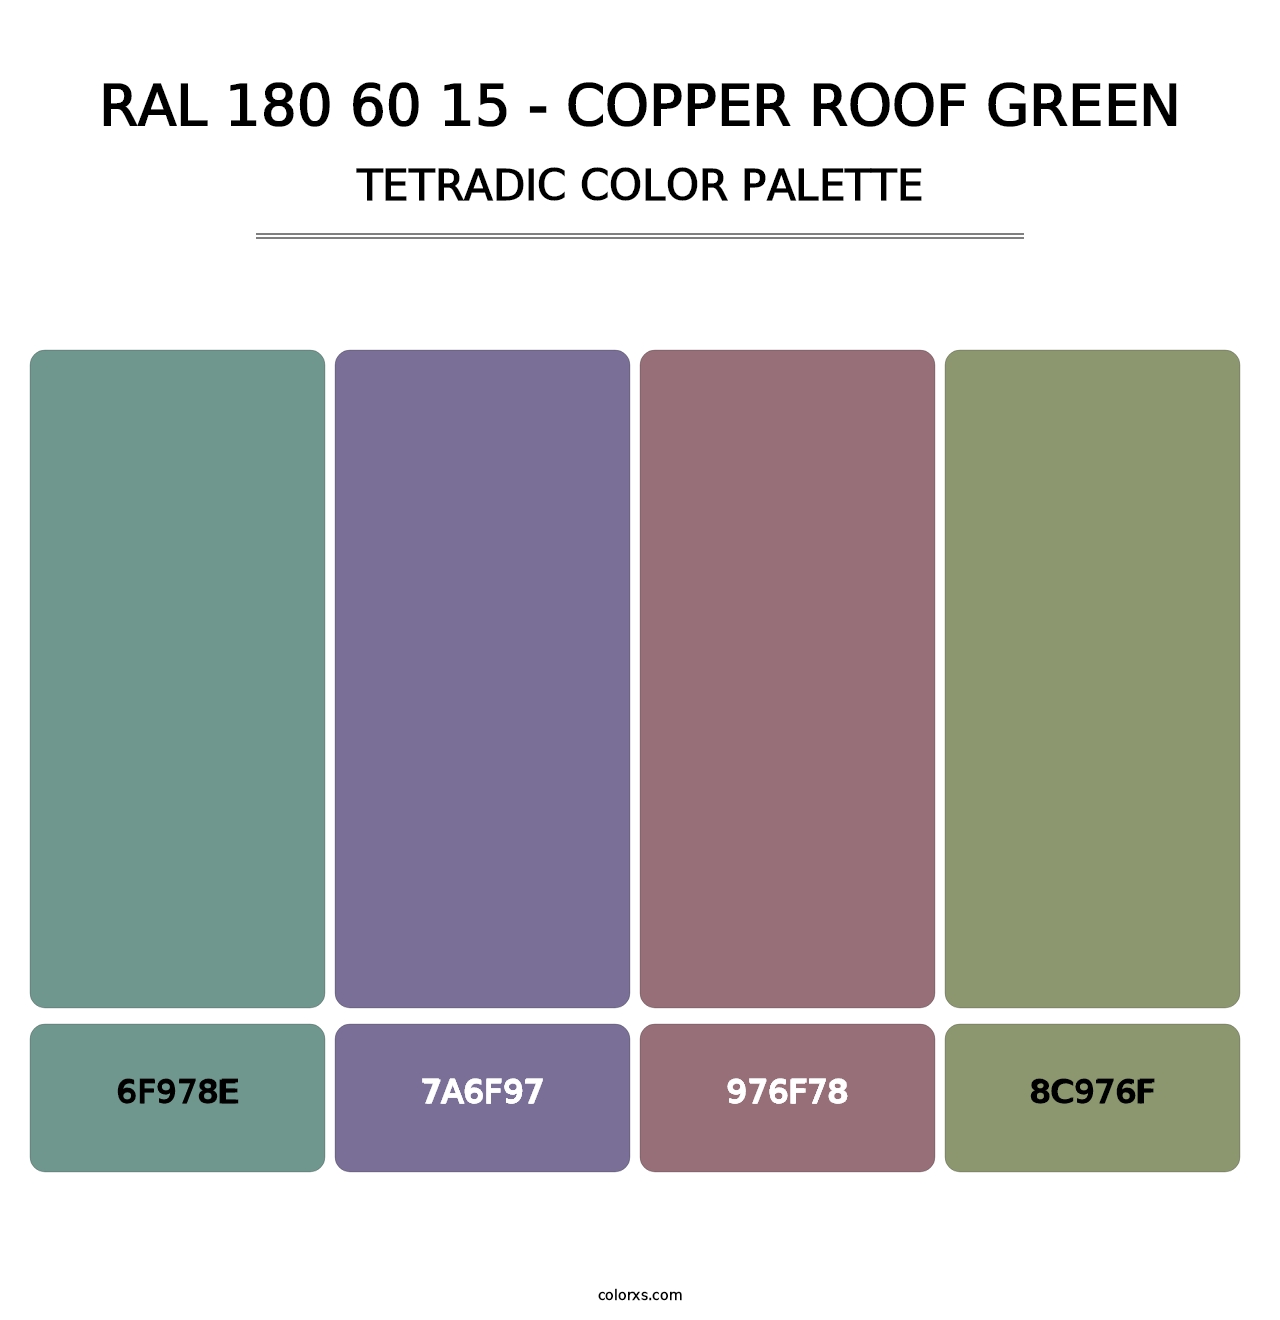 RAL 180 60 15 - Copper Roof Green - Tetradic Color Palette